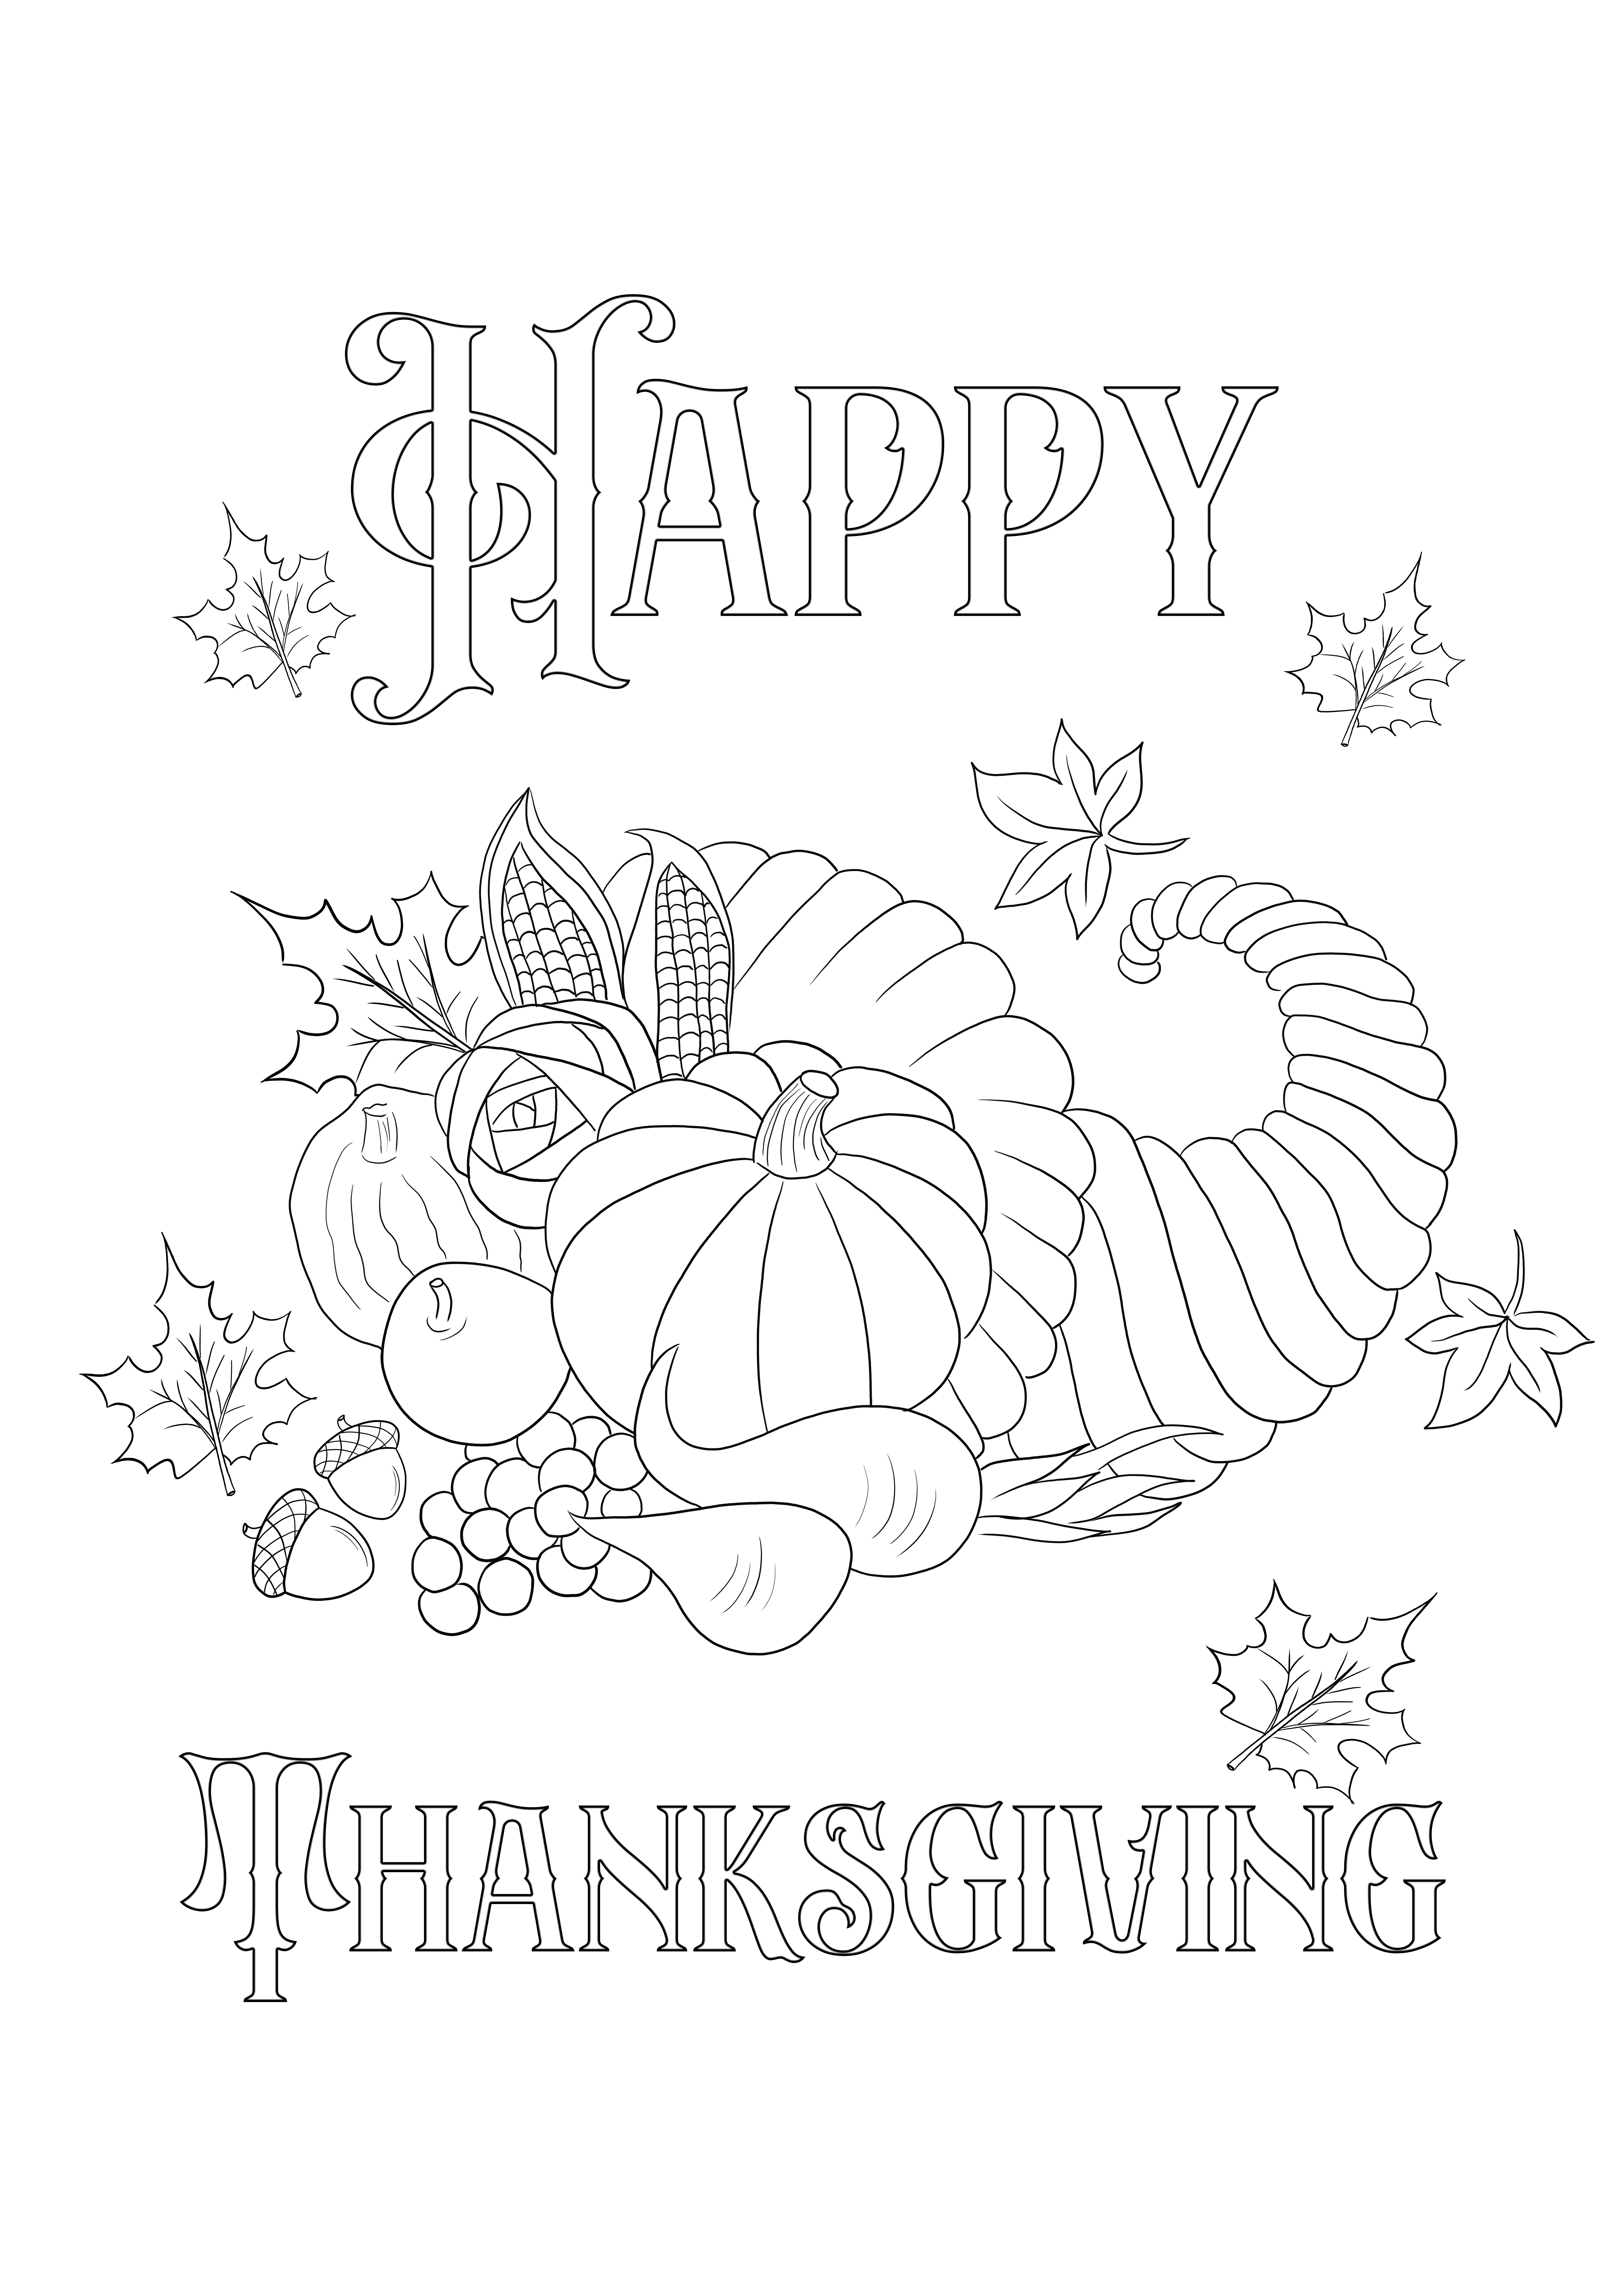 Free printable of the Thanksgiving card to color for kids of all ages